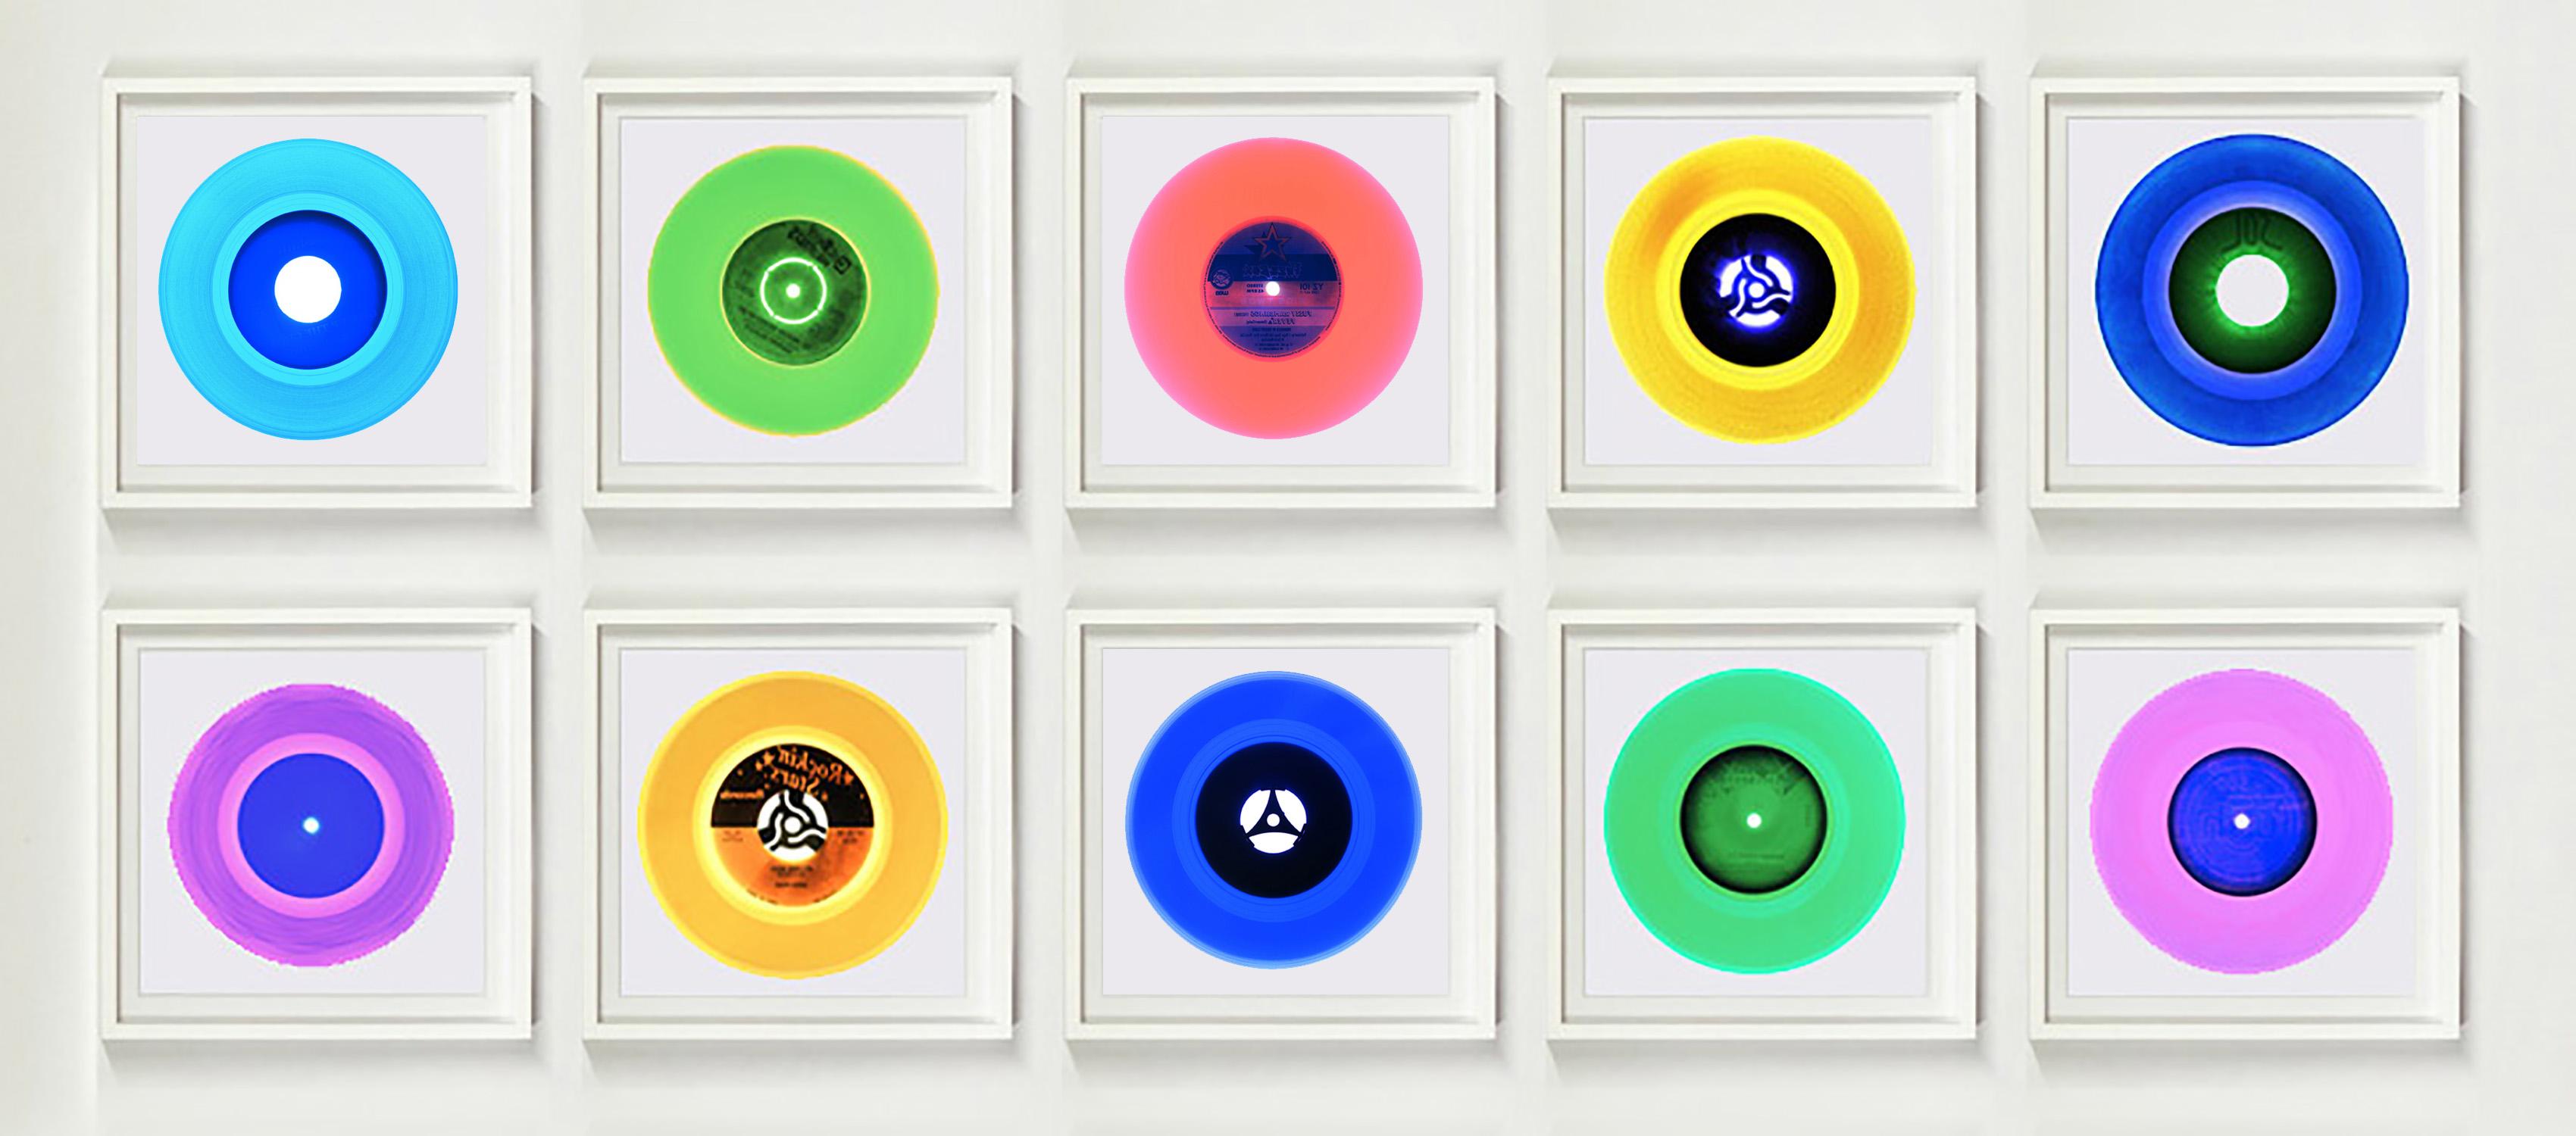 Heidler & Heeps Vinyl Collection Ten Piece B Side Installation.
Acclaimed contemporary photographers, Richard Heeps and Natasha Heidler have collaborated to make this beautifully mesmerising collection. A celebration of the vinyl record and analogue